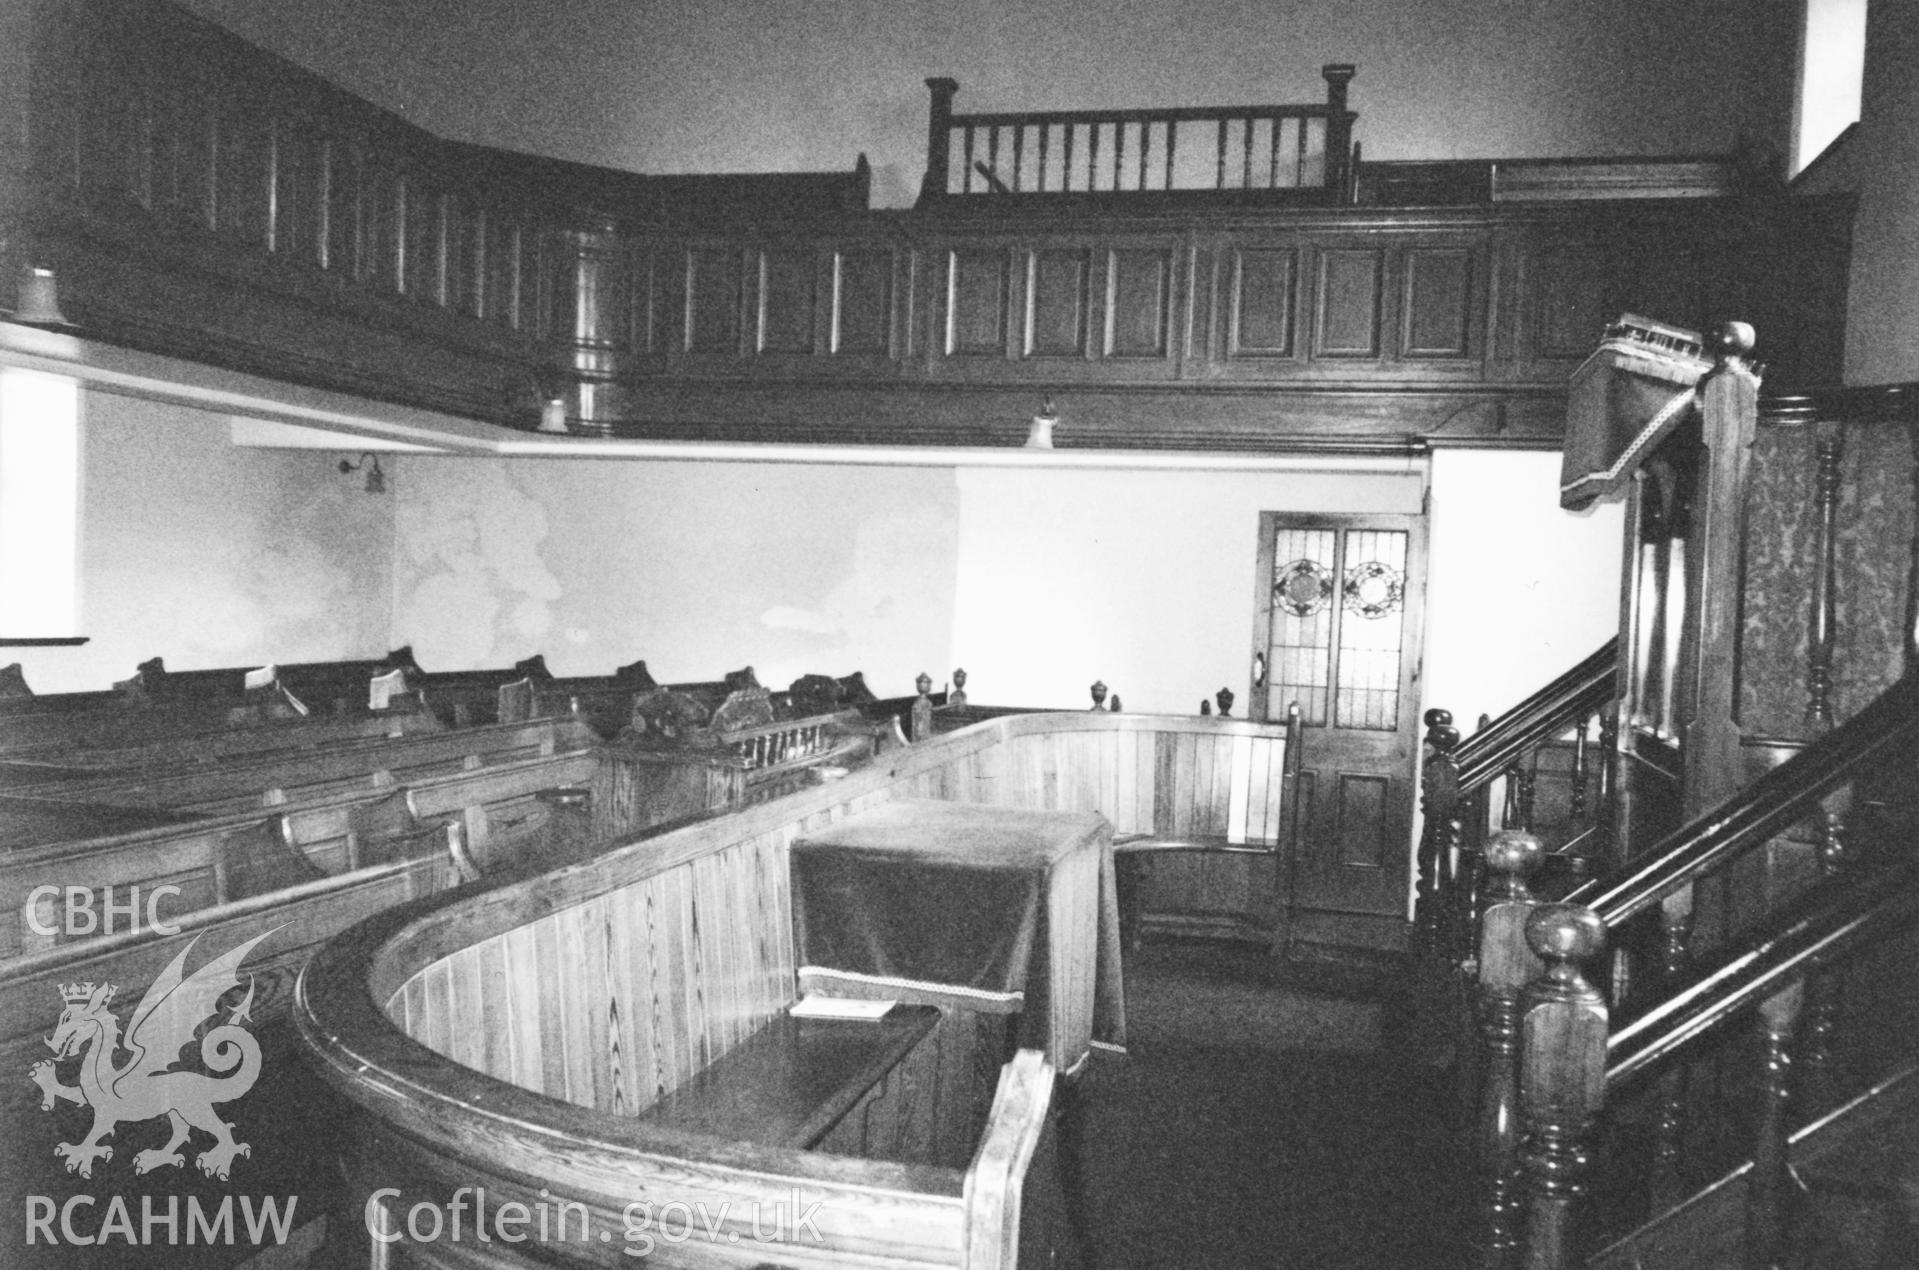 Digital copy of a black and white photograph showing an interior view of Capel y Graig Welsh Calvinistic Methodist Chapel, Cwmbach, taken by Robert Scourfield, 1996.